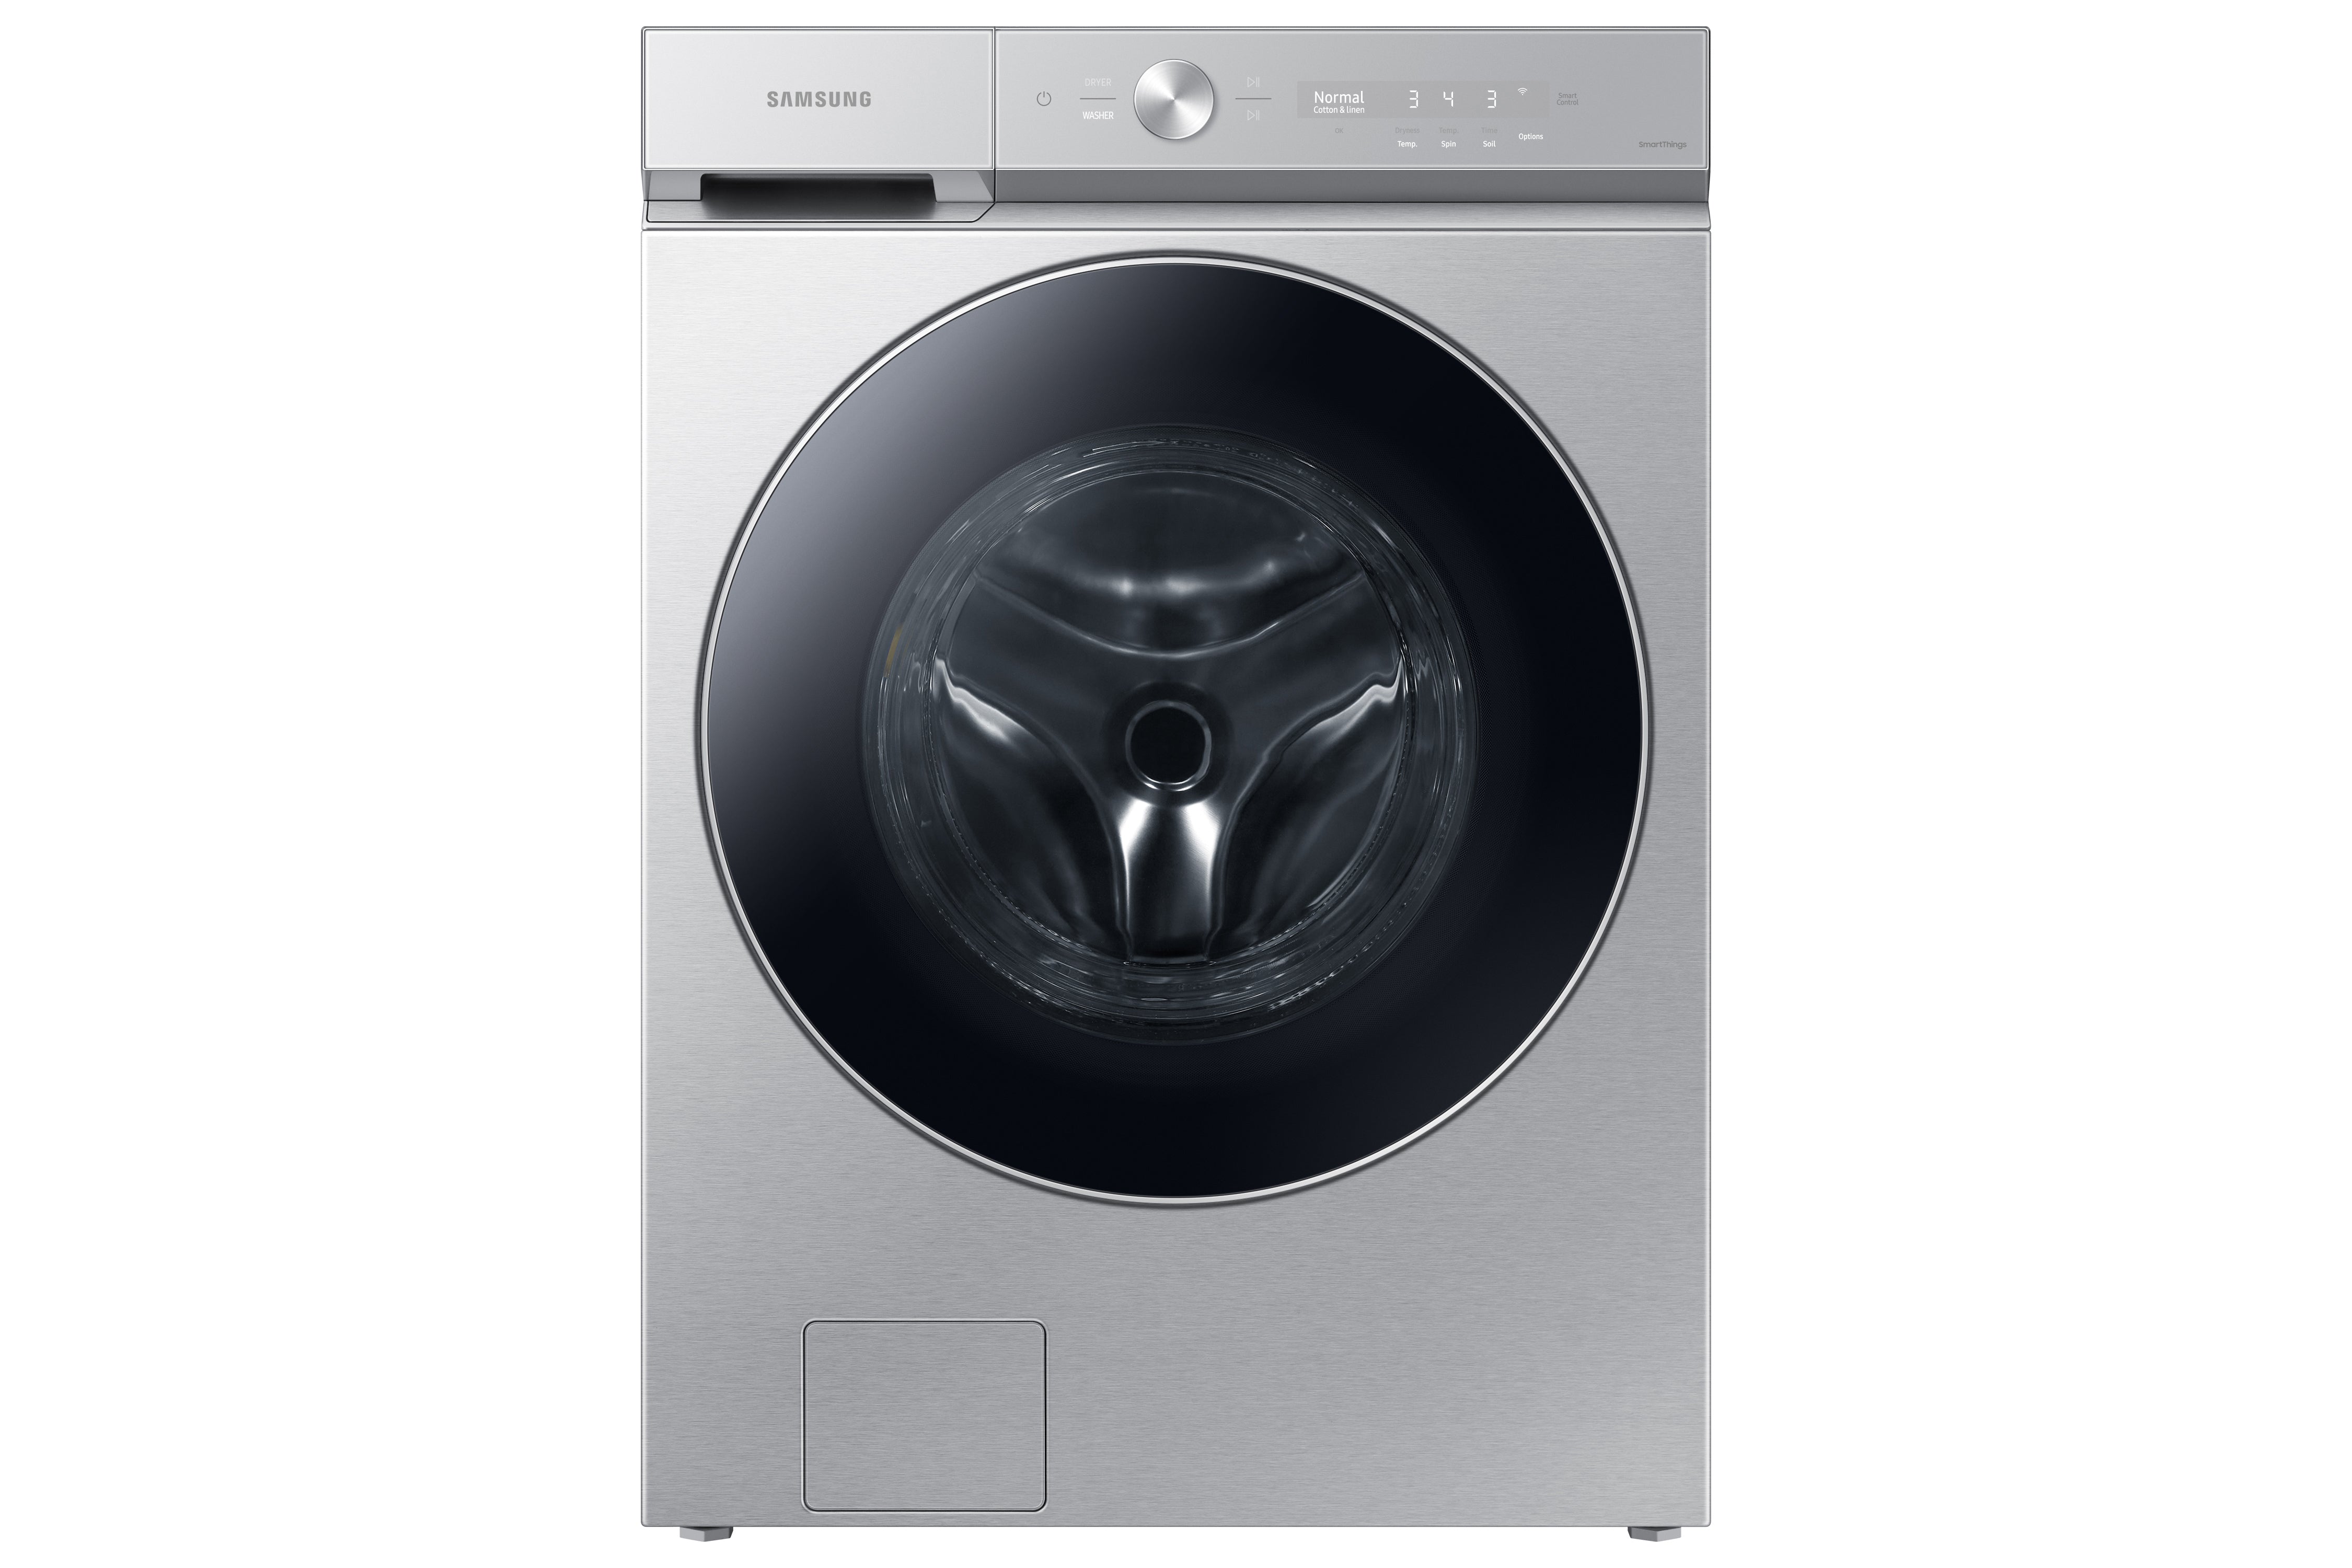 Samsung - Bespoke 6.1 cu. Ft  Front Load Washer in Silver - WF53BB8900ATUS